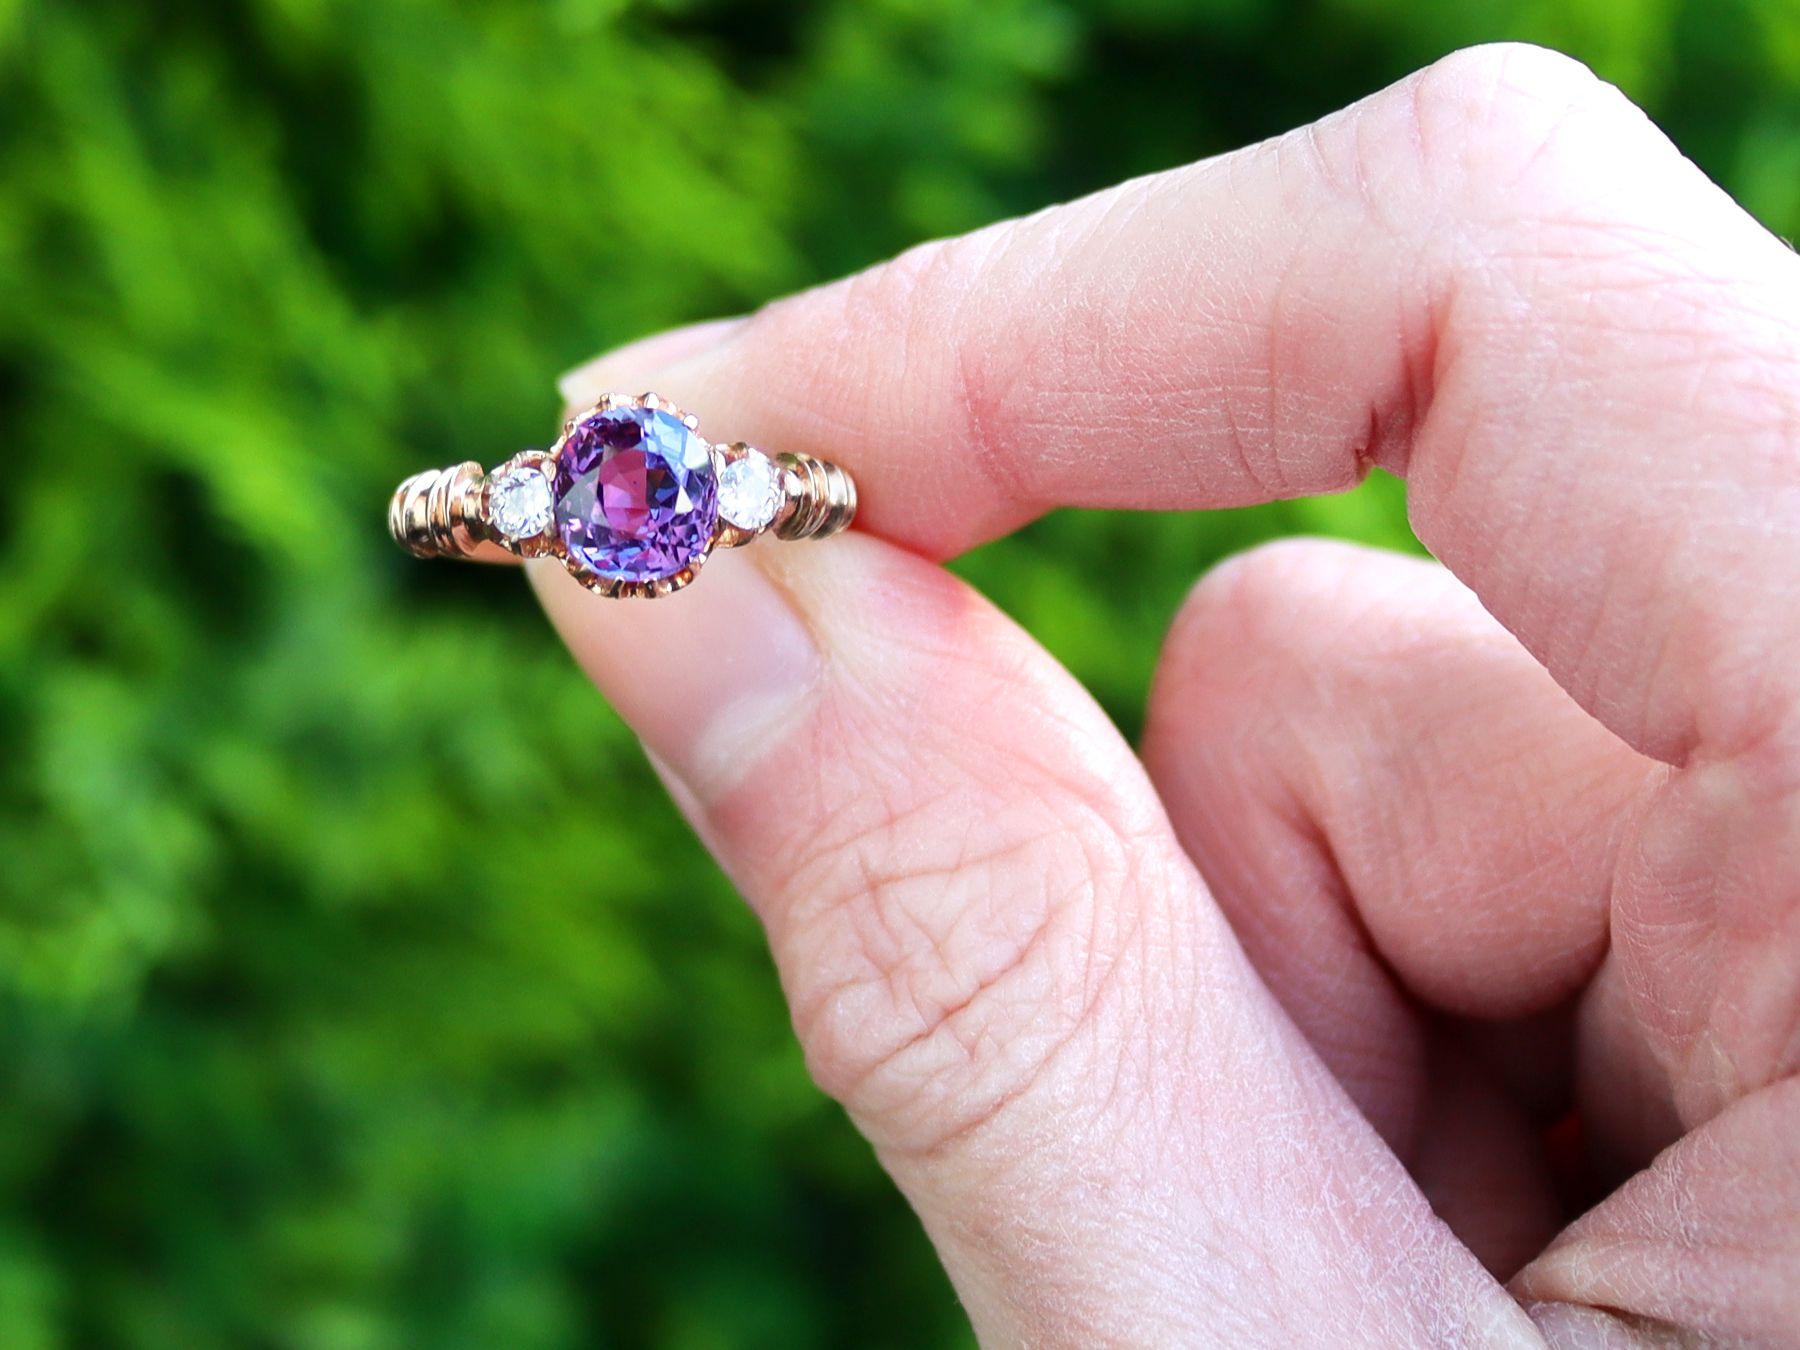 A stunning antique Victorian 1.50 carat Ceylon purple sapphire and 0.12 carat diamond, 15 karat rose gold trilogy ring; part of our diverse antique jewellery collections

This stunning, fine and impressive antique sapphire ring has been crafted in